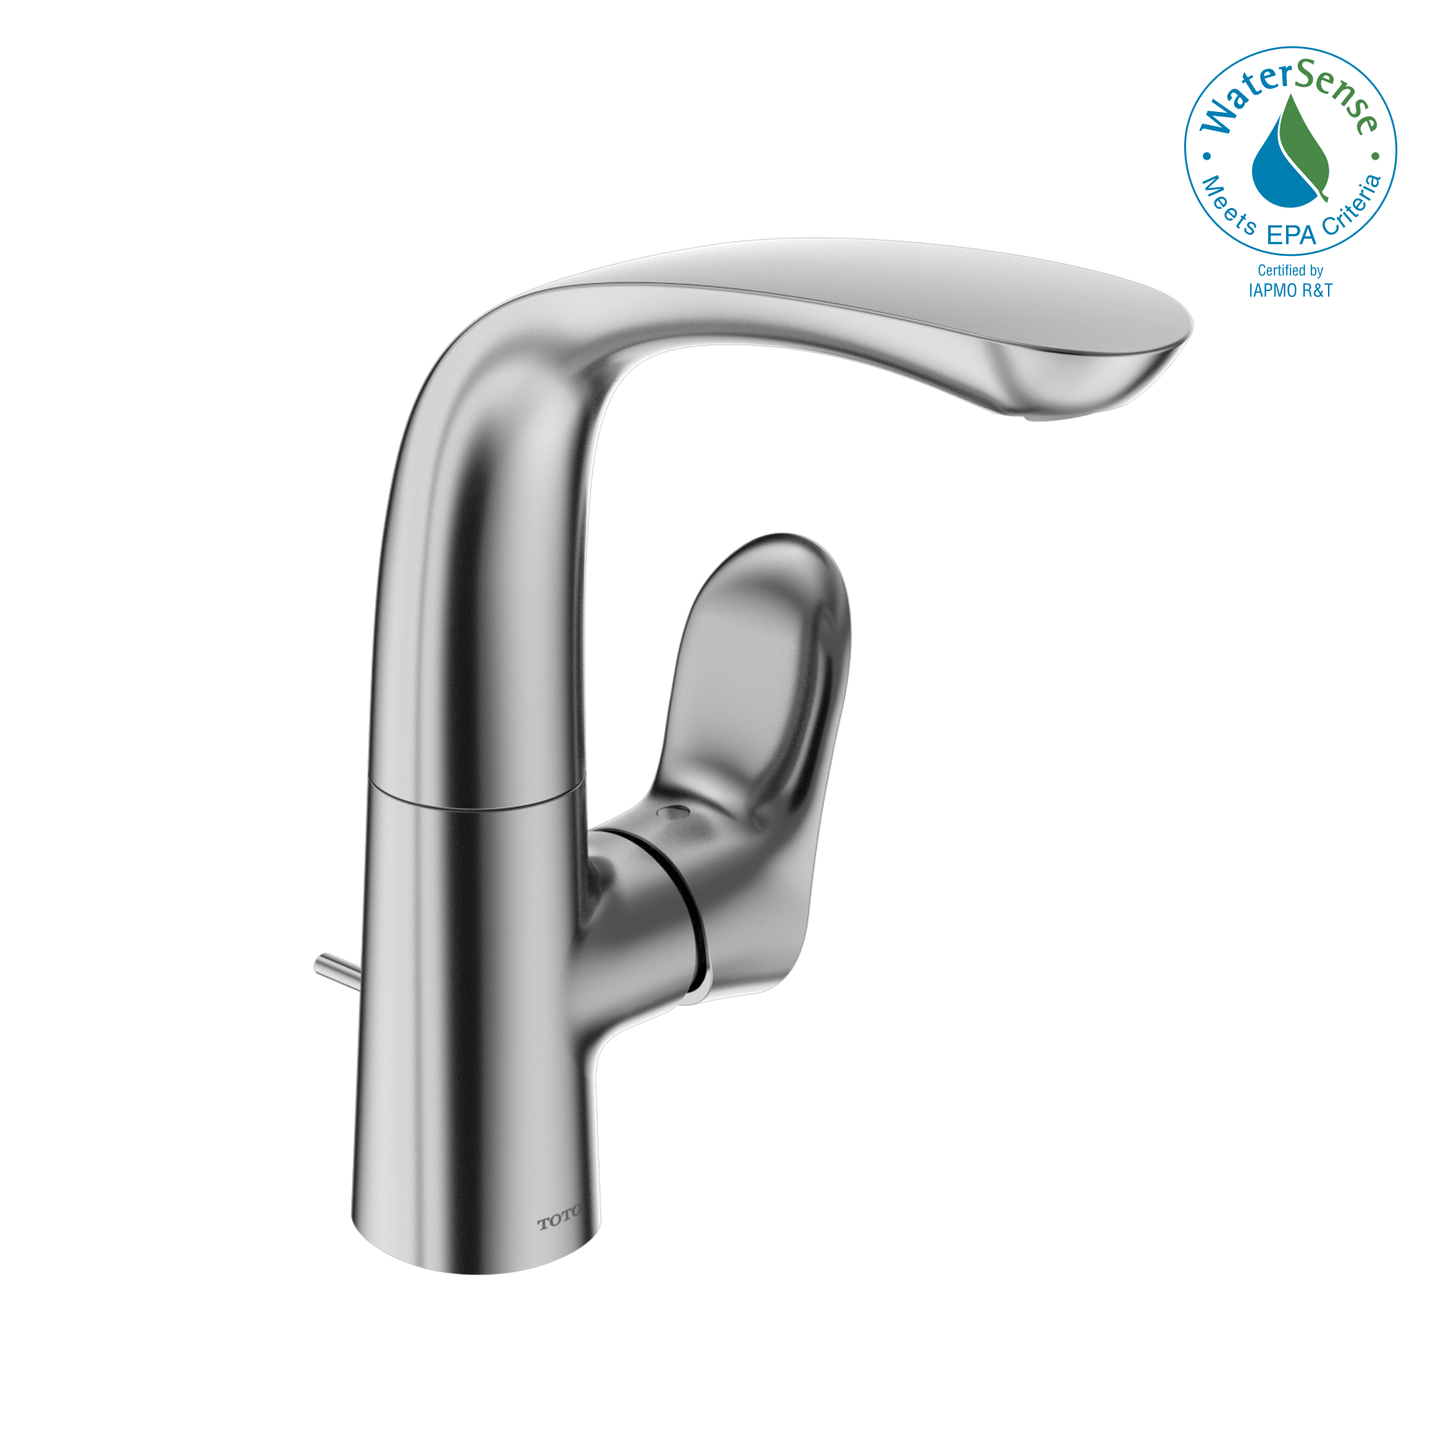 TOTO® GO 1.2 GPM Single Side-Handle Bathroom Sink Faucet with COMFORT GLIDE Technology and Drain Assembly - TLG01309U